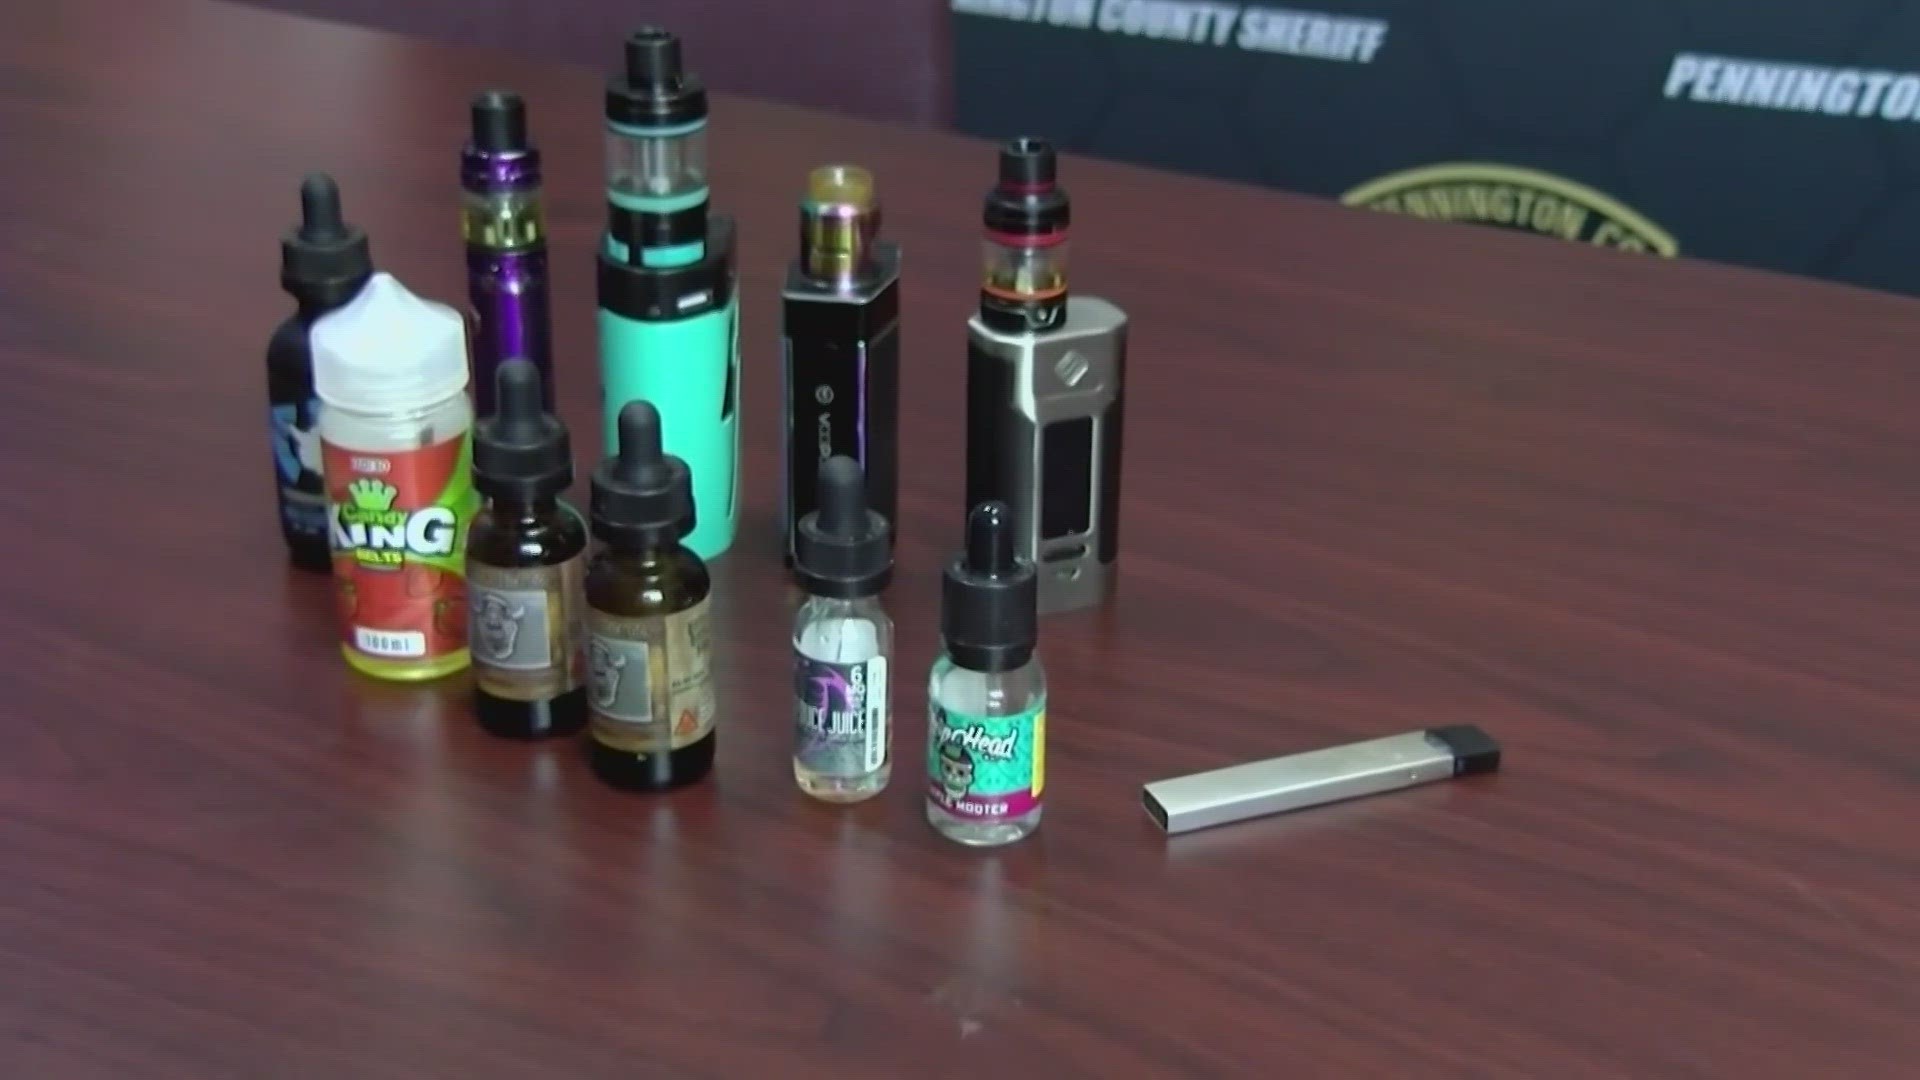 Bangor is one of a thousand school districts suing the company Juul for its marketing of vaping products to minors. The school board voted to accept the money.